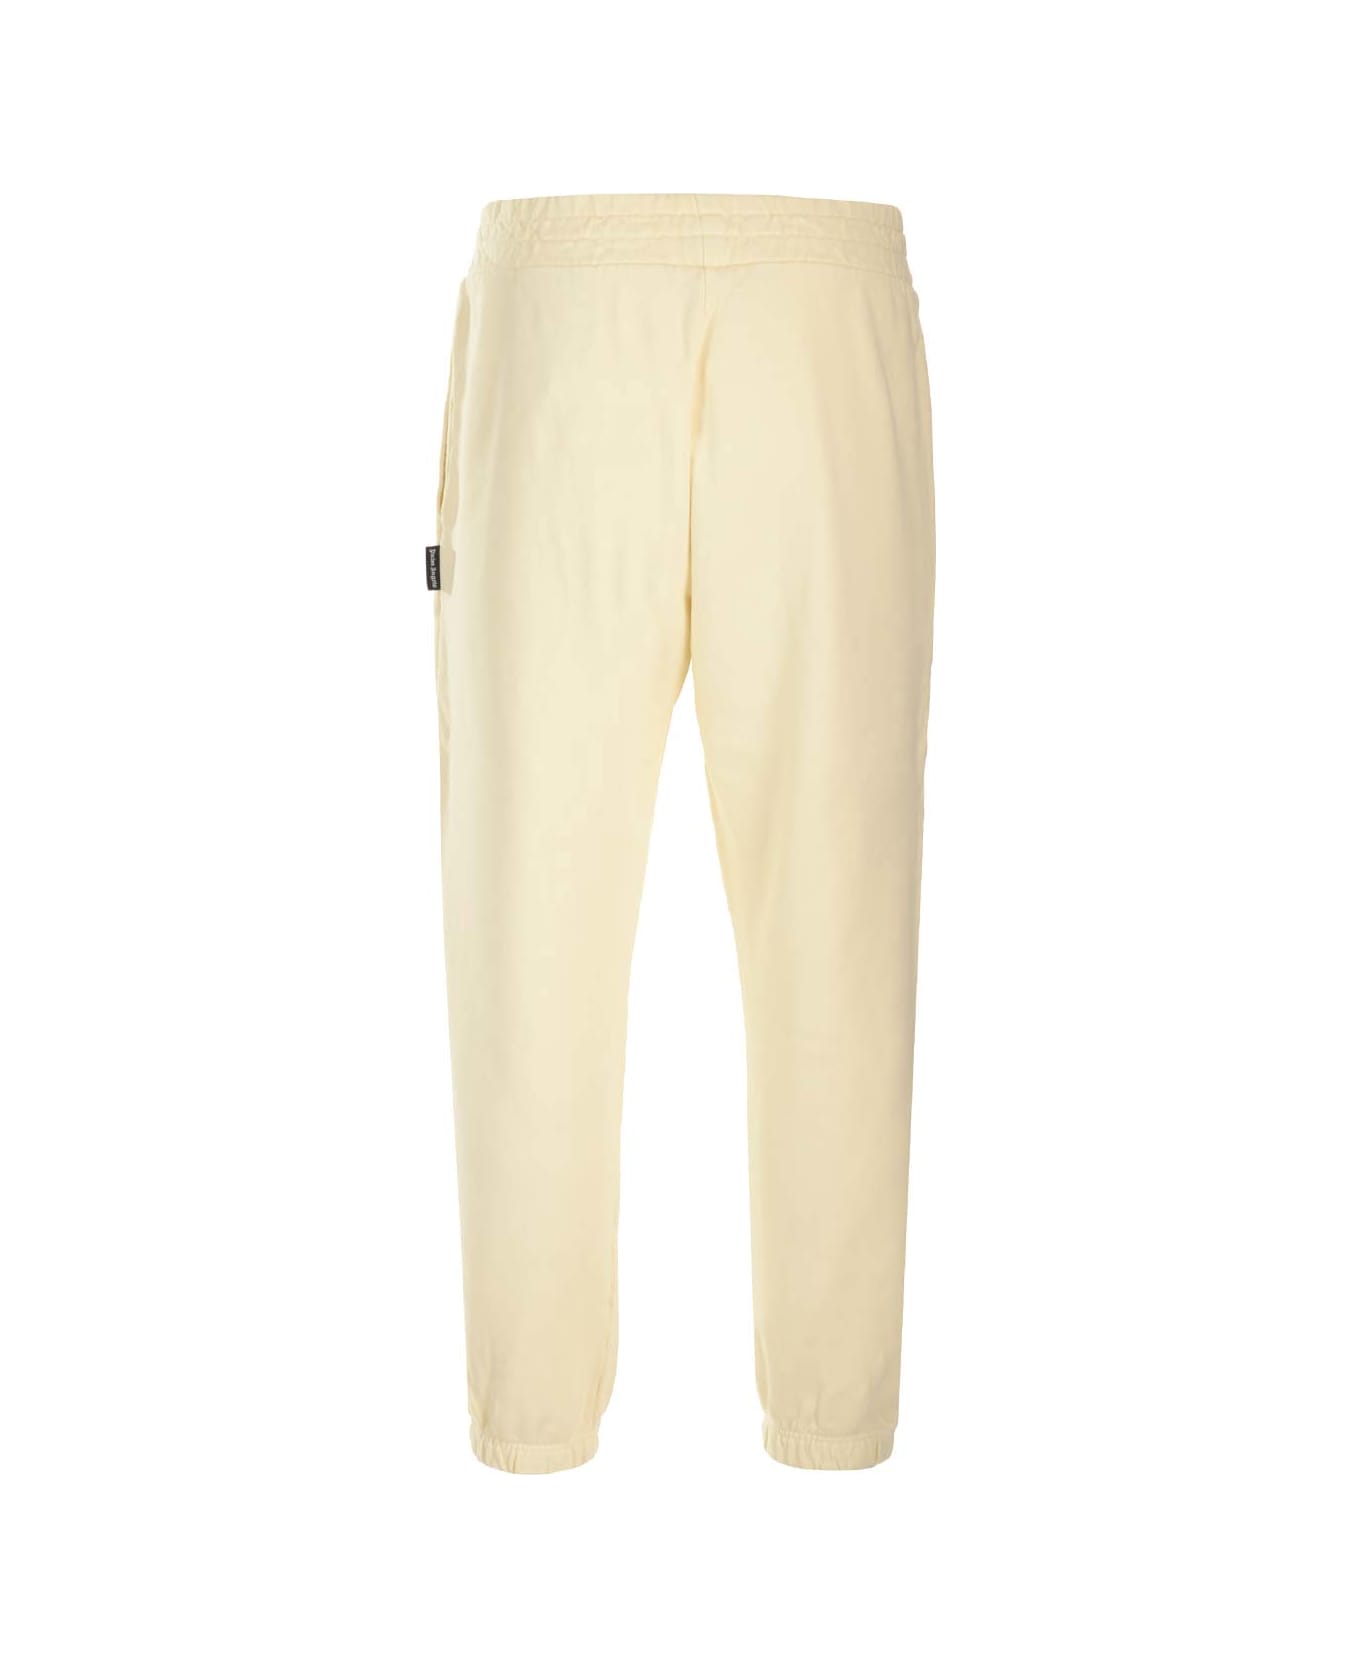 Palm Angels The Palm Track Pants - White